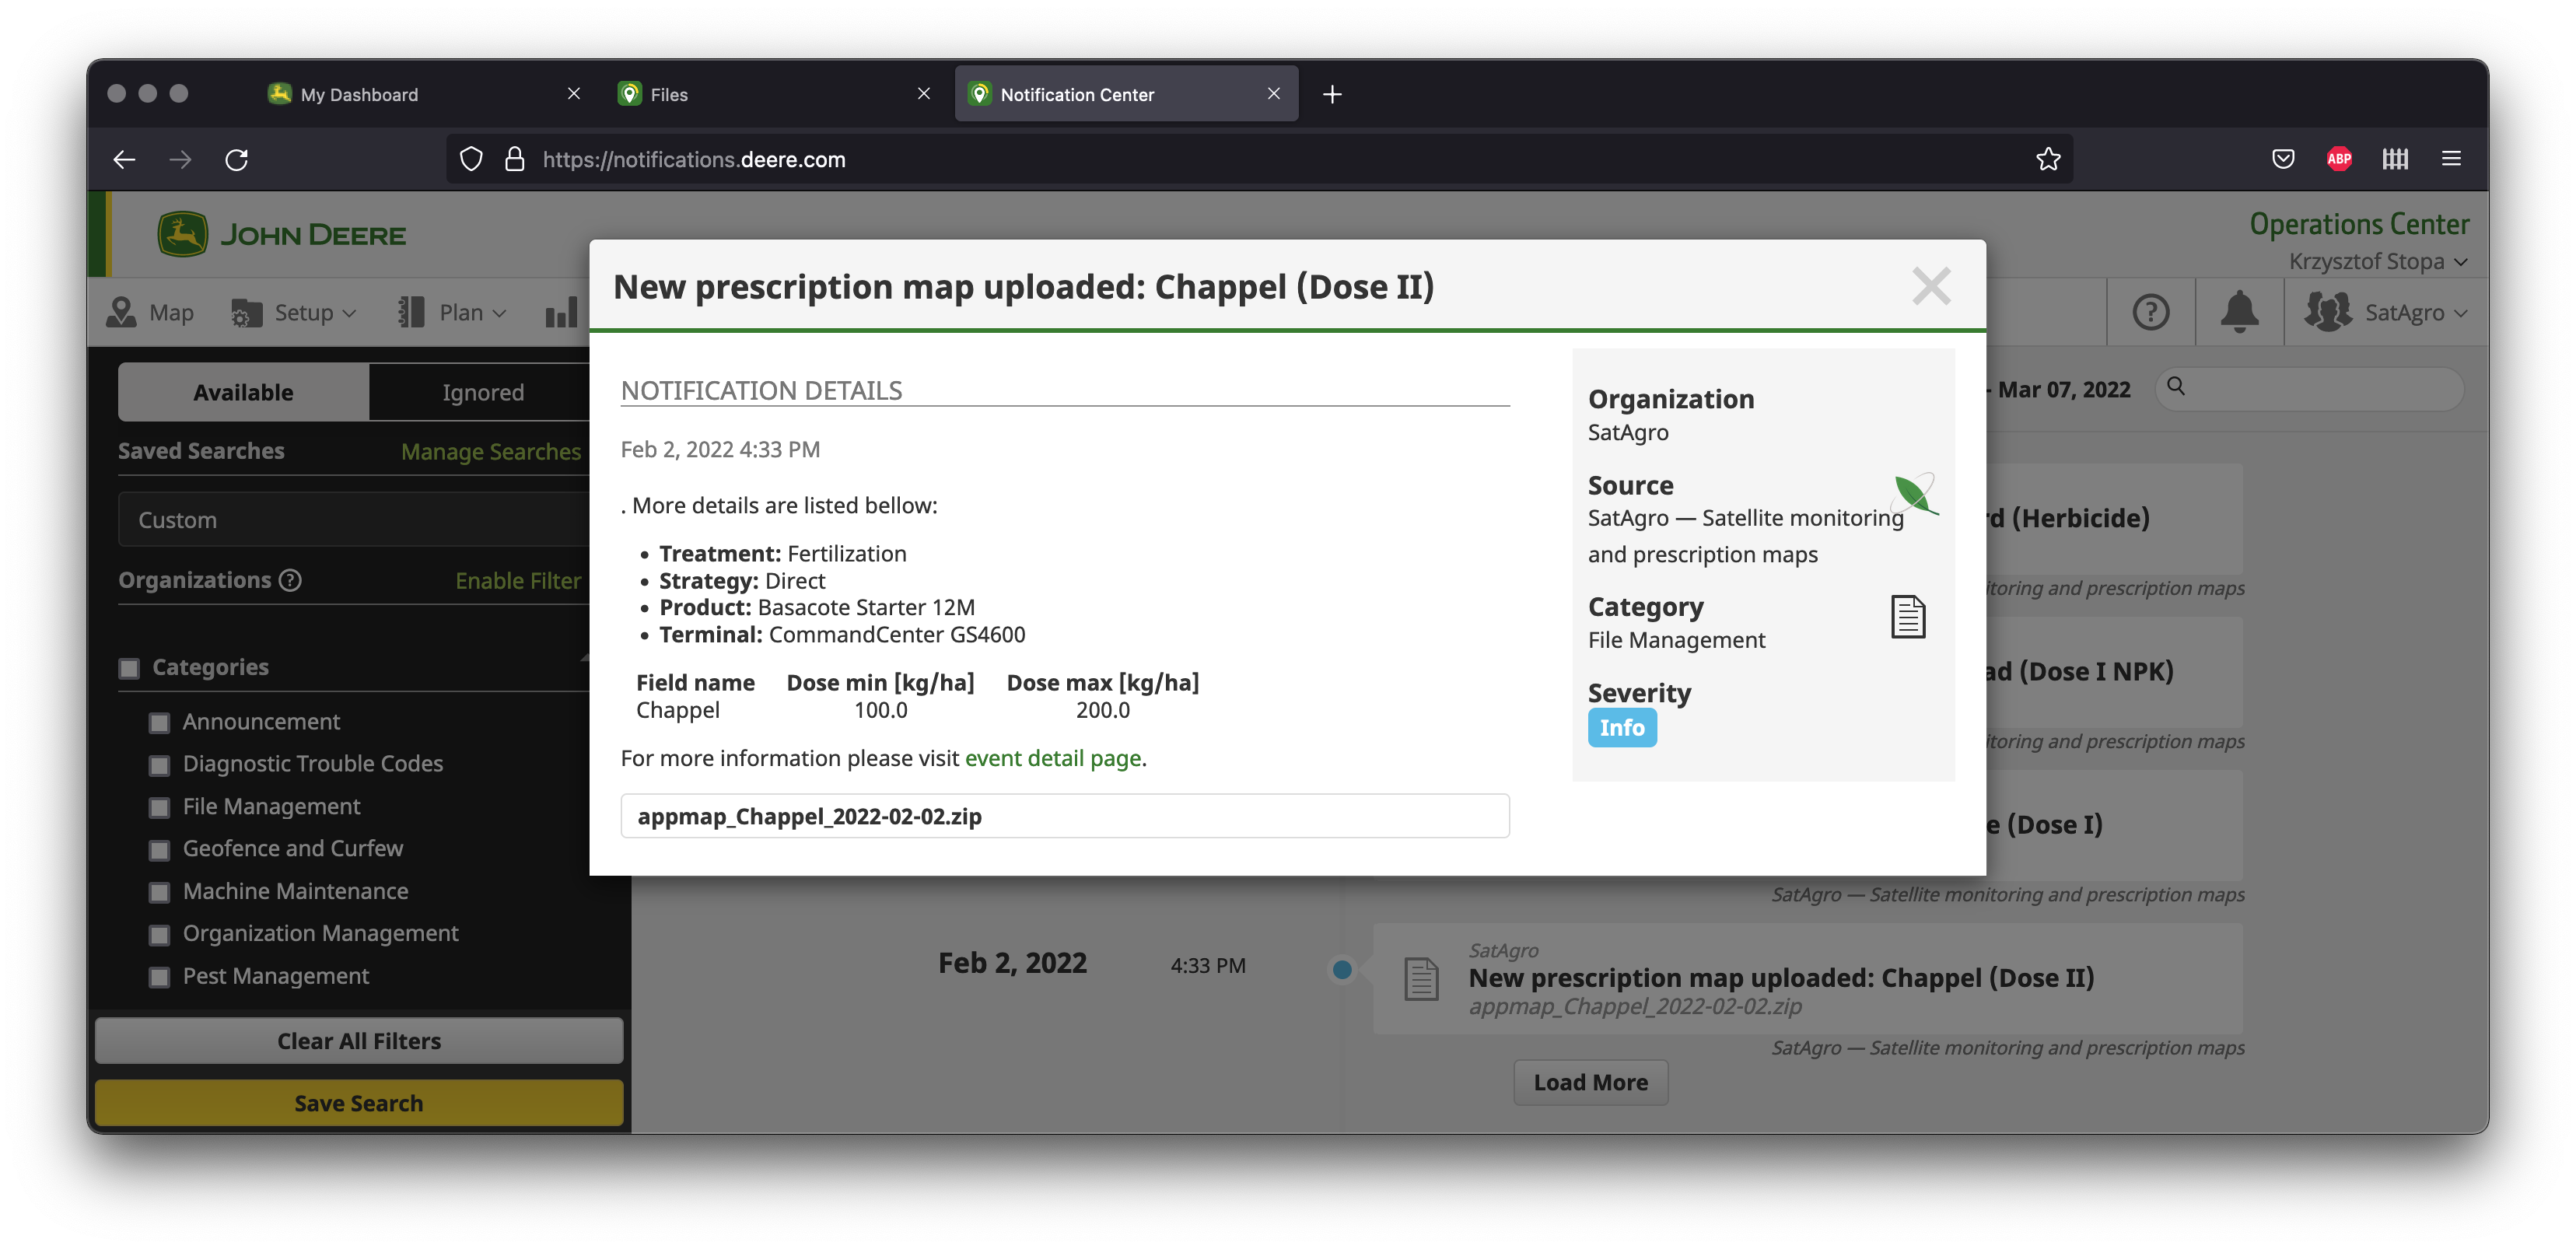 Screenshot showing the details of a notification with prescription details in the Notification Centre.